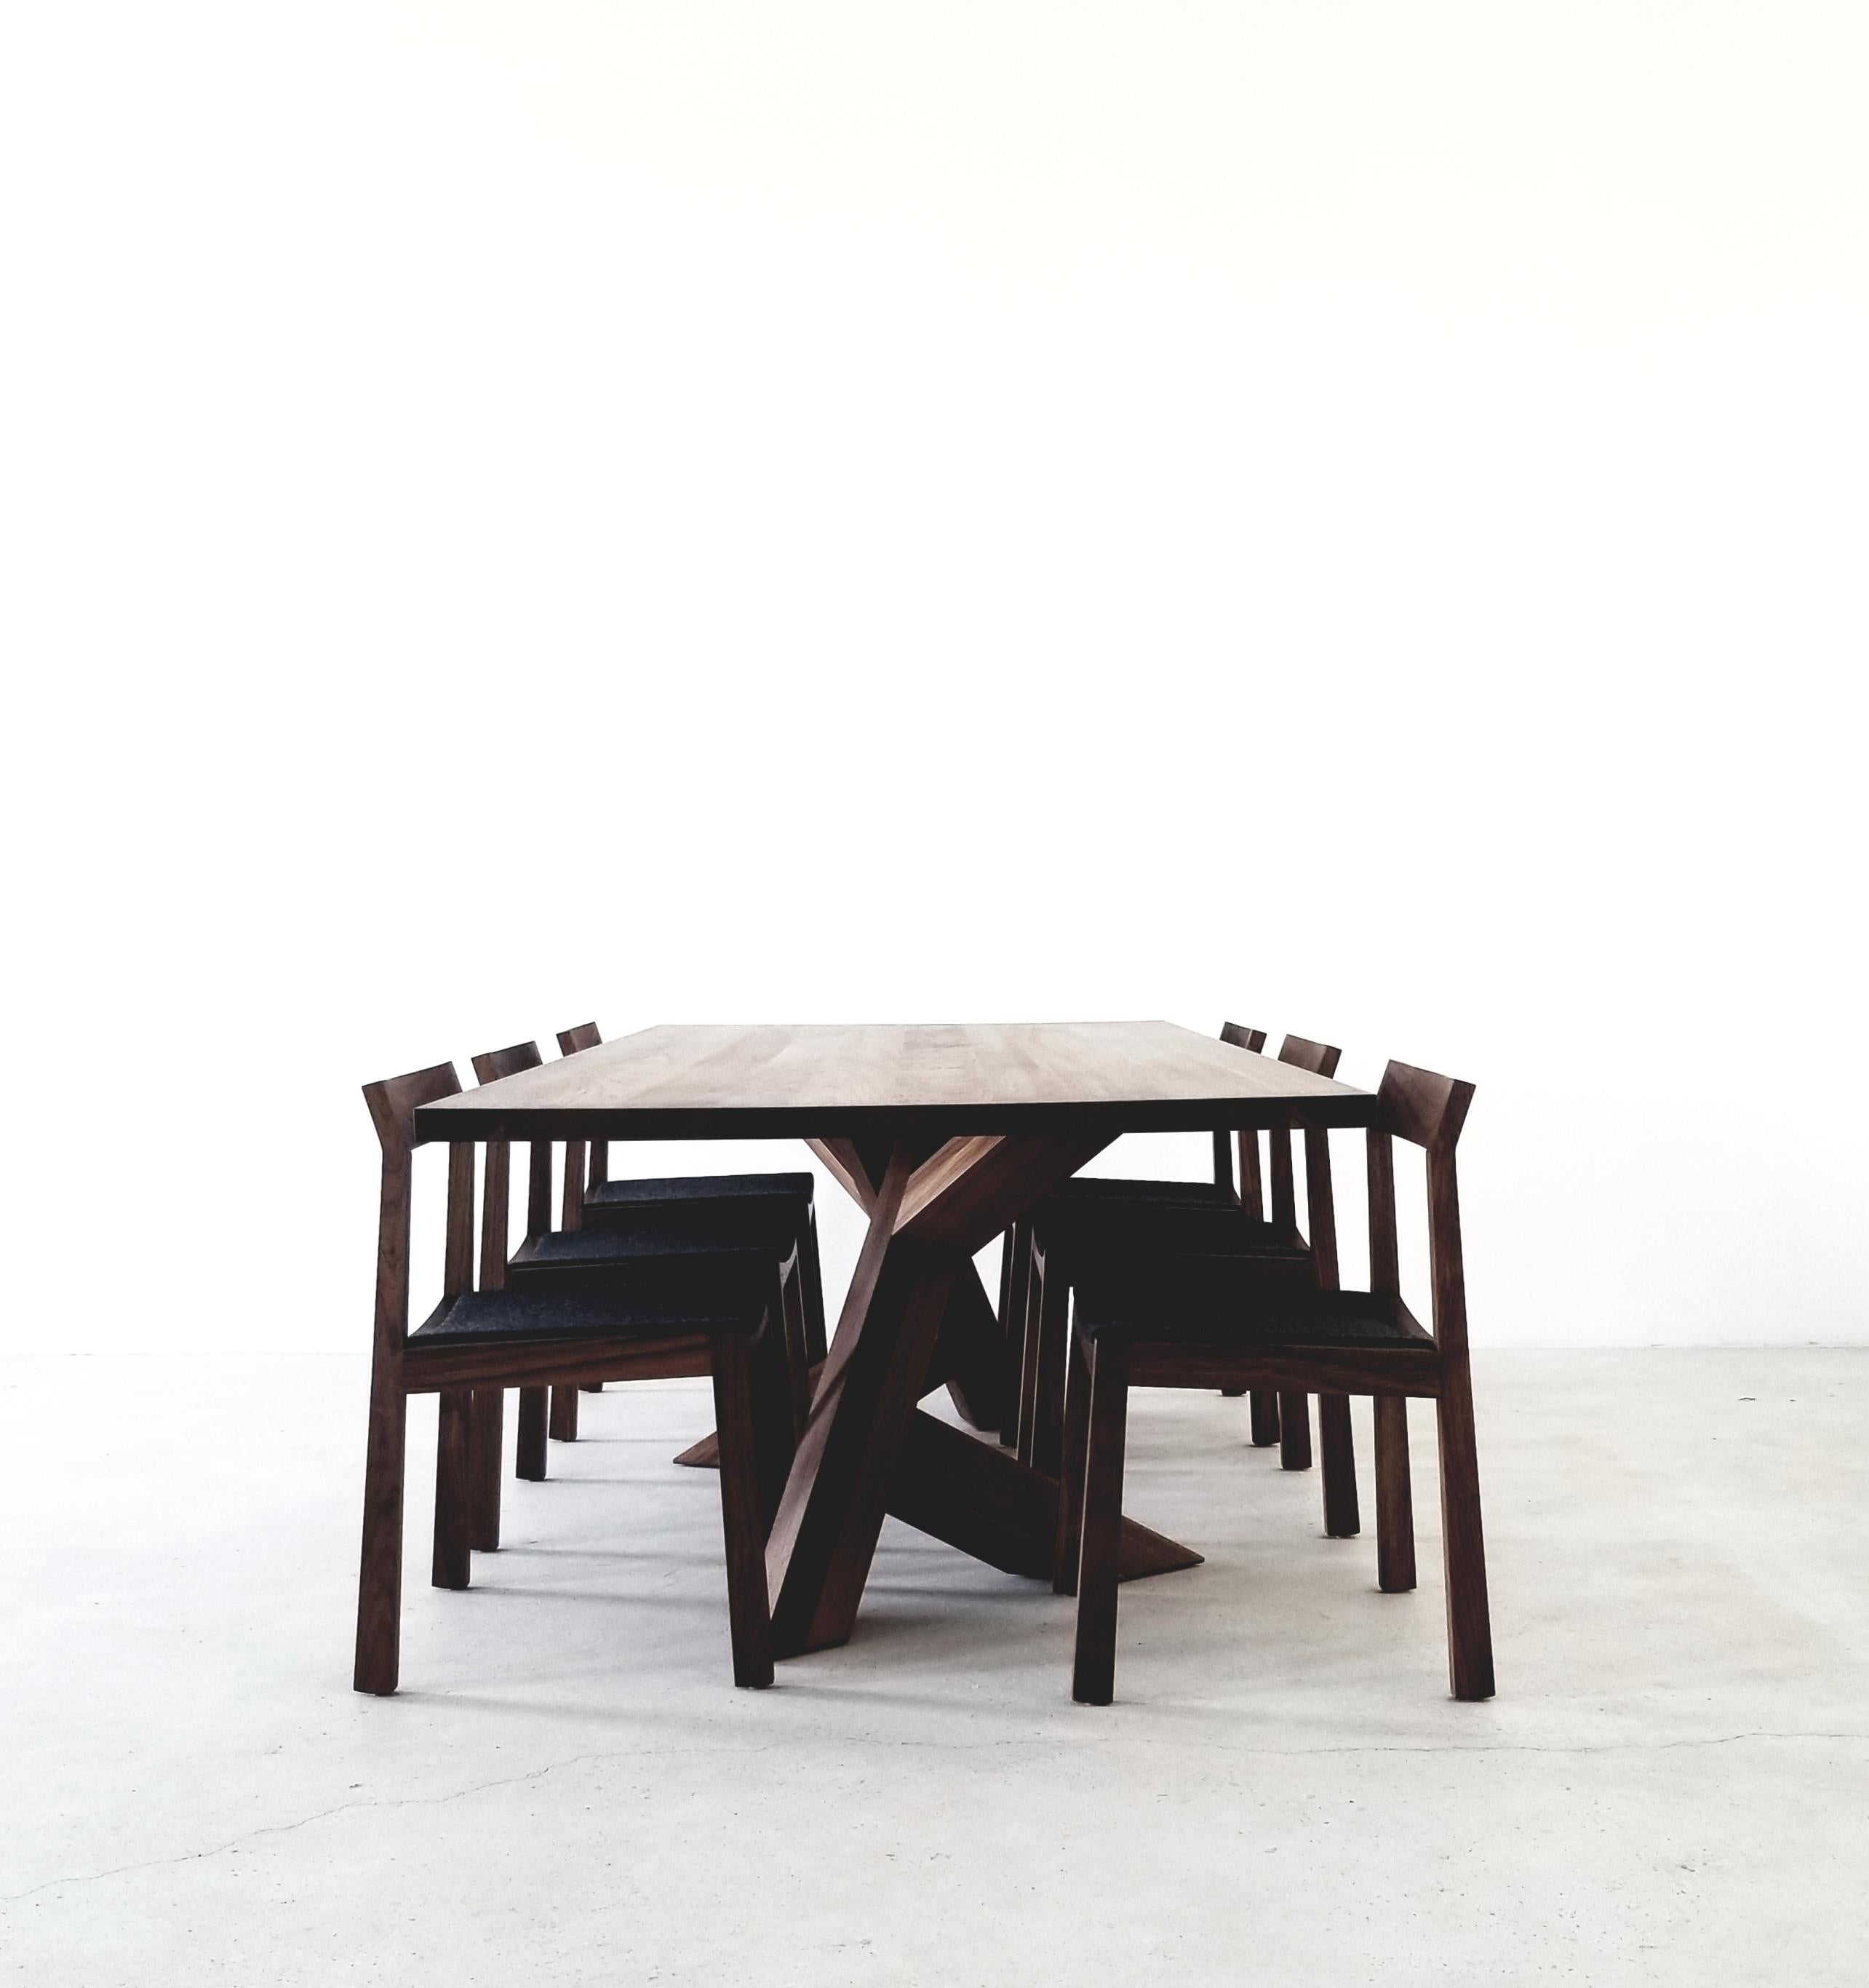 North American Iconoclast Modern Hardwood Dining Table by Izm